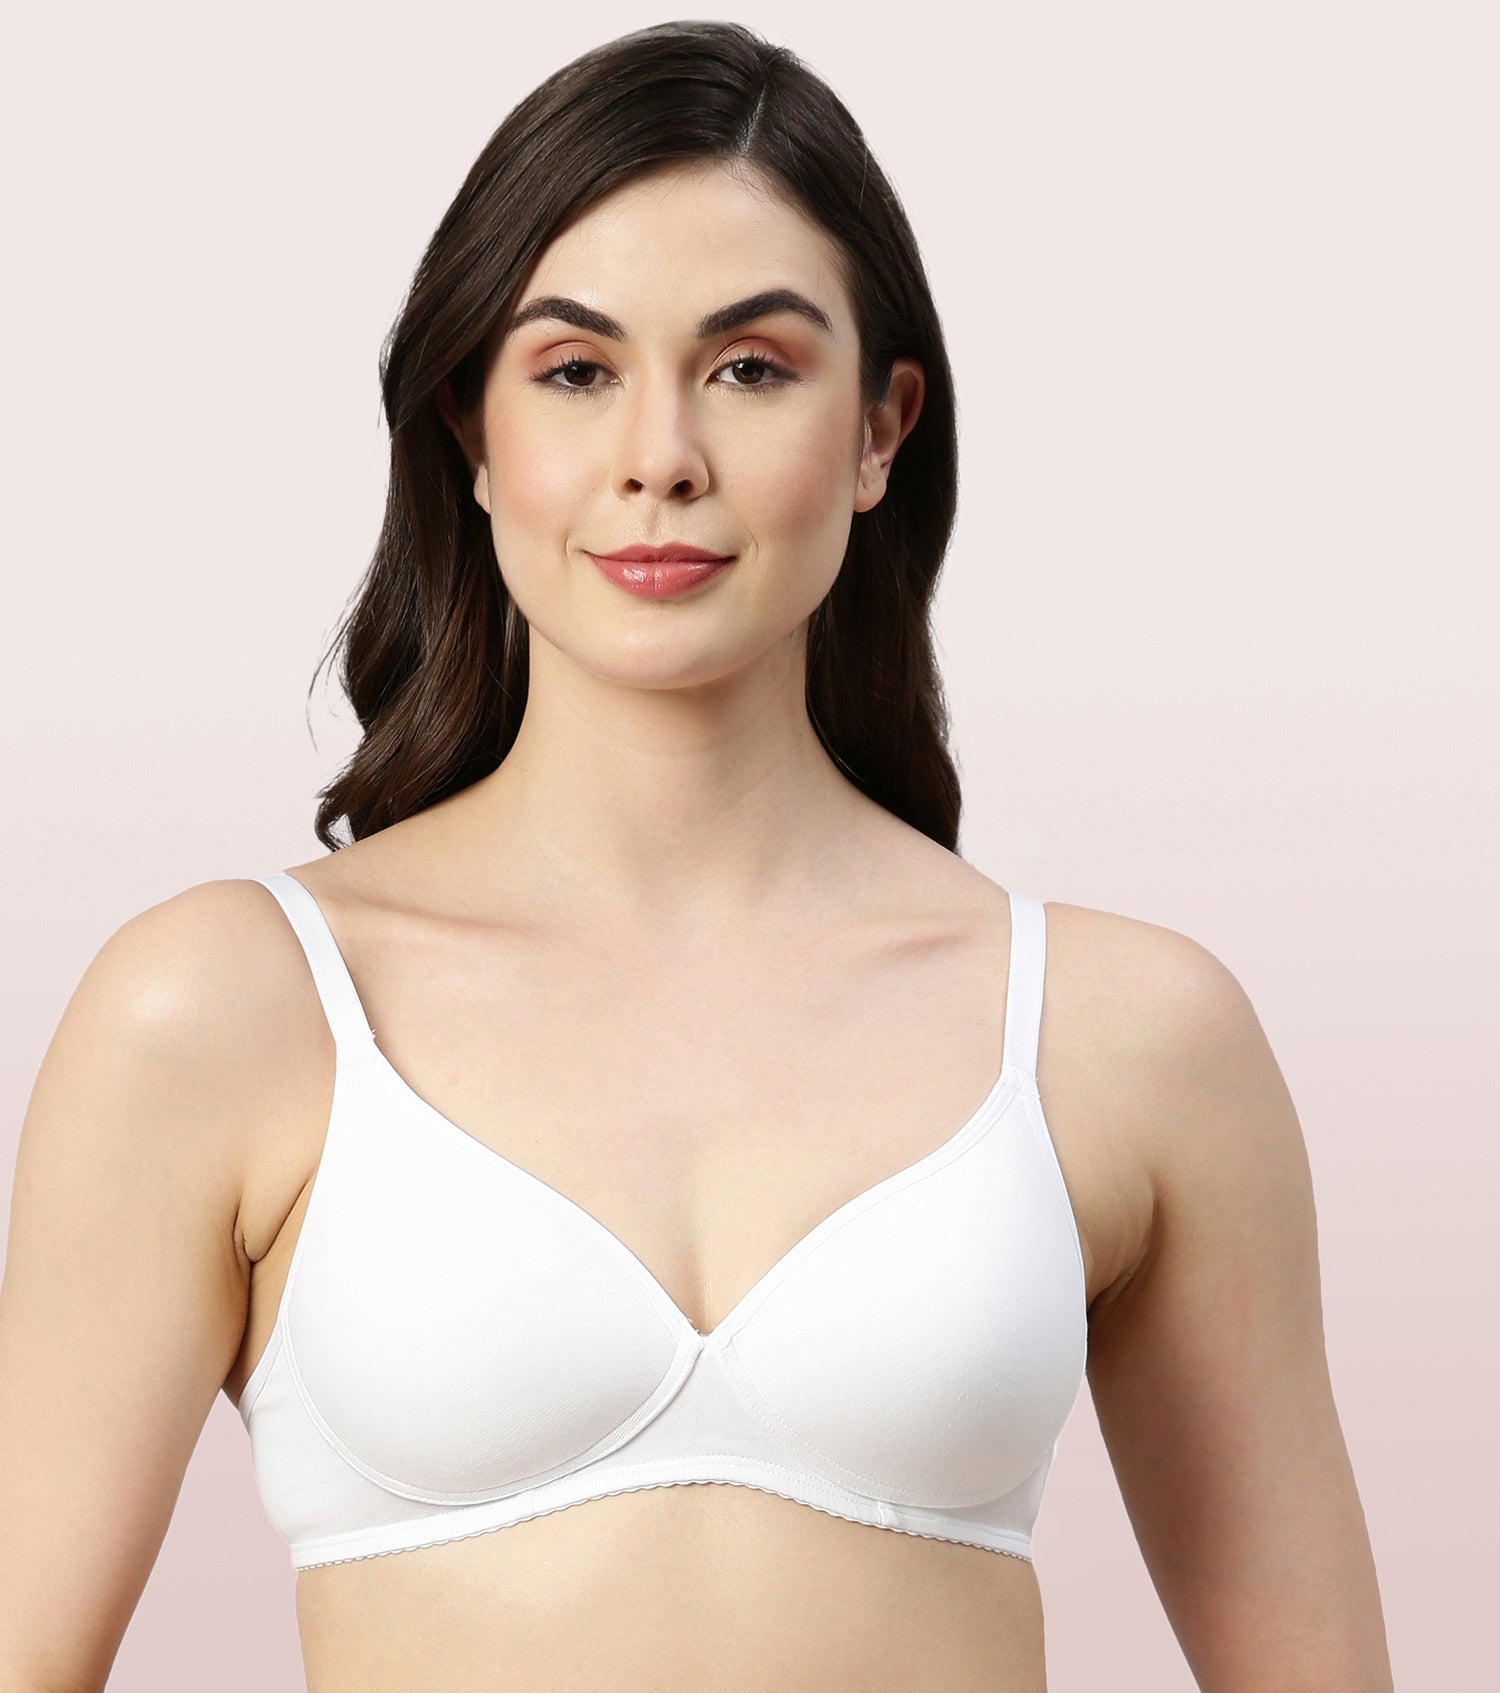 The right bra to wear under a white t-shirt - Reviewed